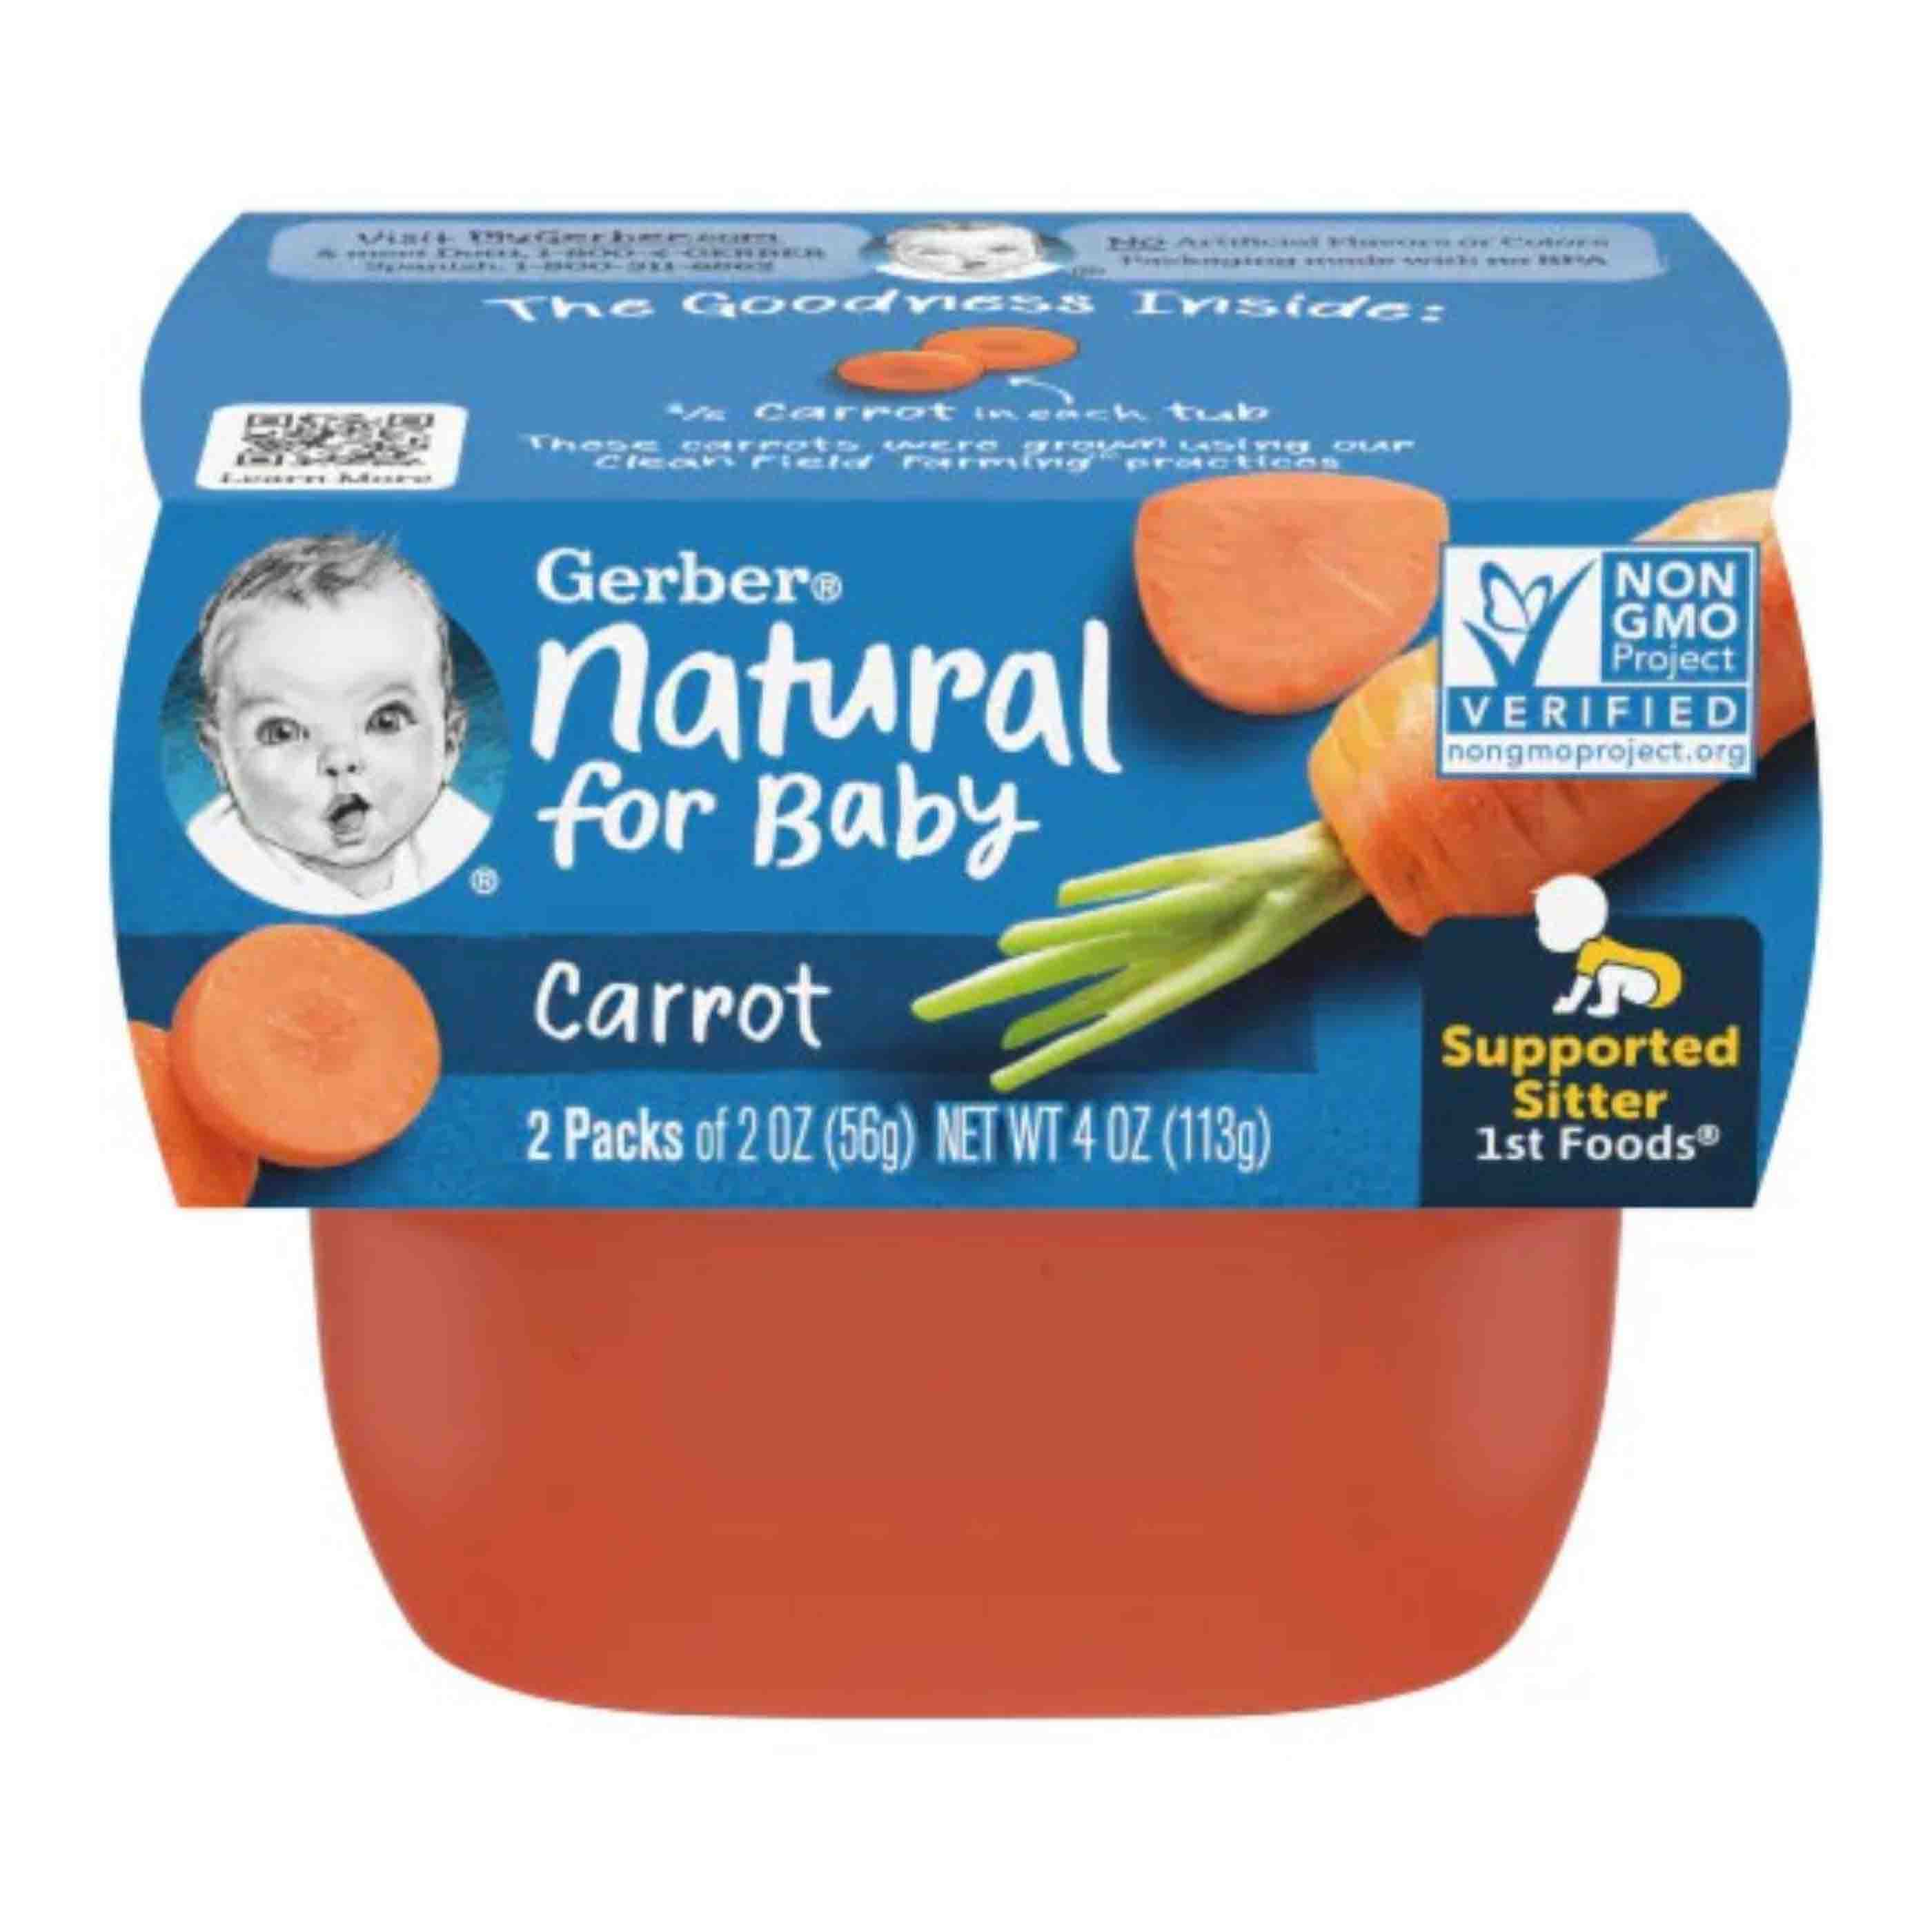 GERBER Puree 1st Foods Carrot Flavored Snack For Babies, 2 Pack (56g each) - Supported Sitter